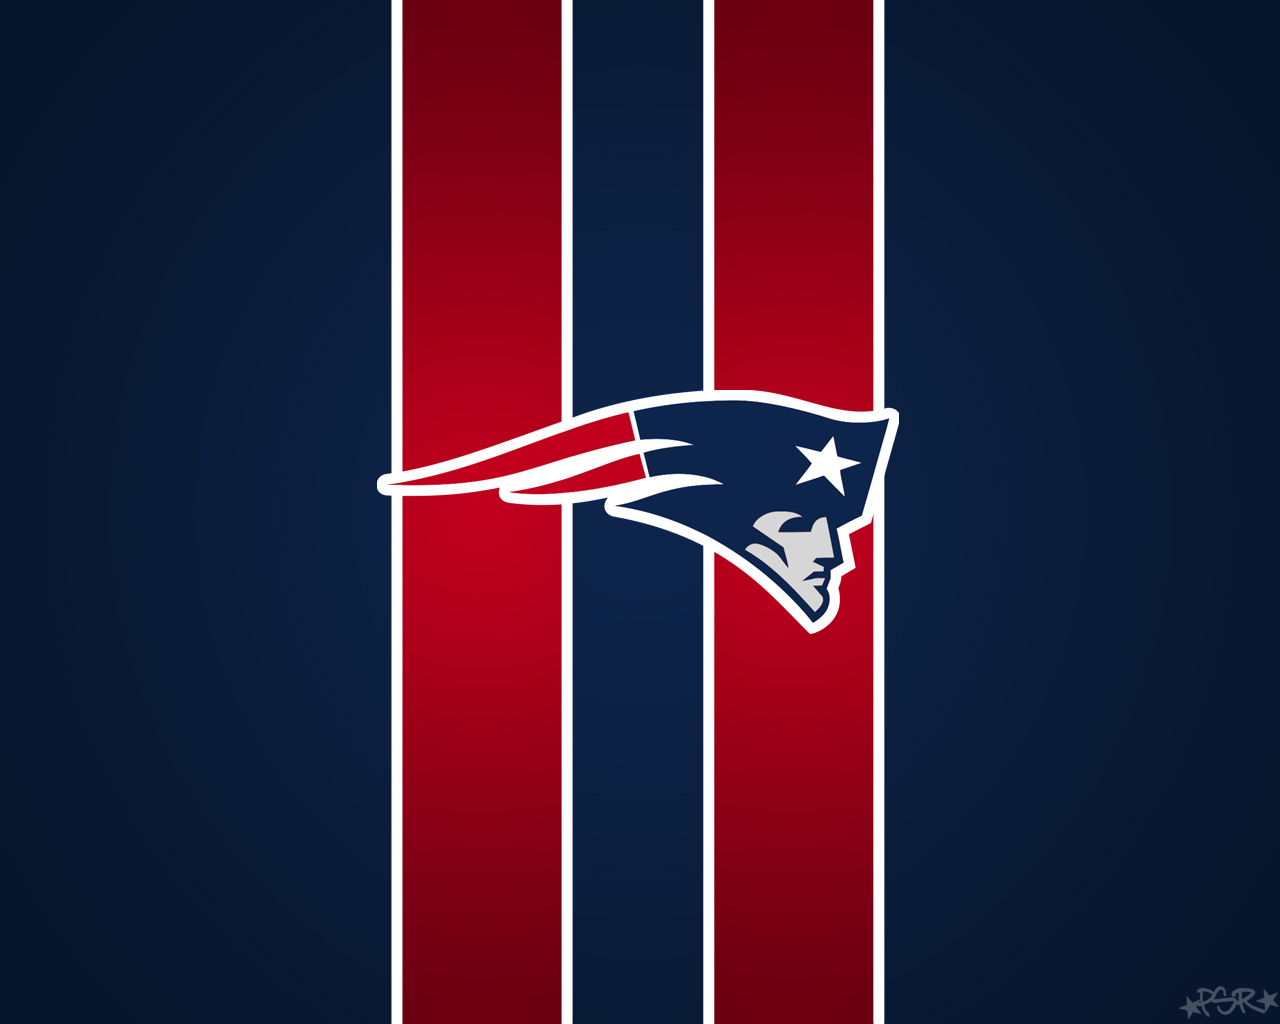 You Like This New England Patriots Wallpaper HD As Much